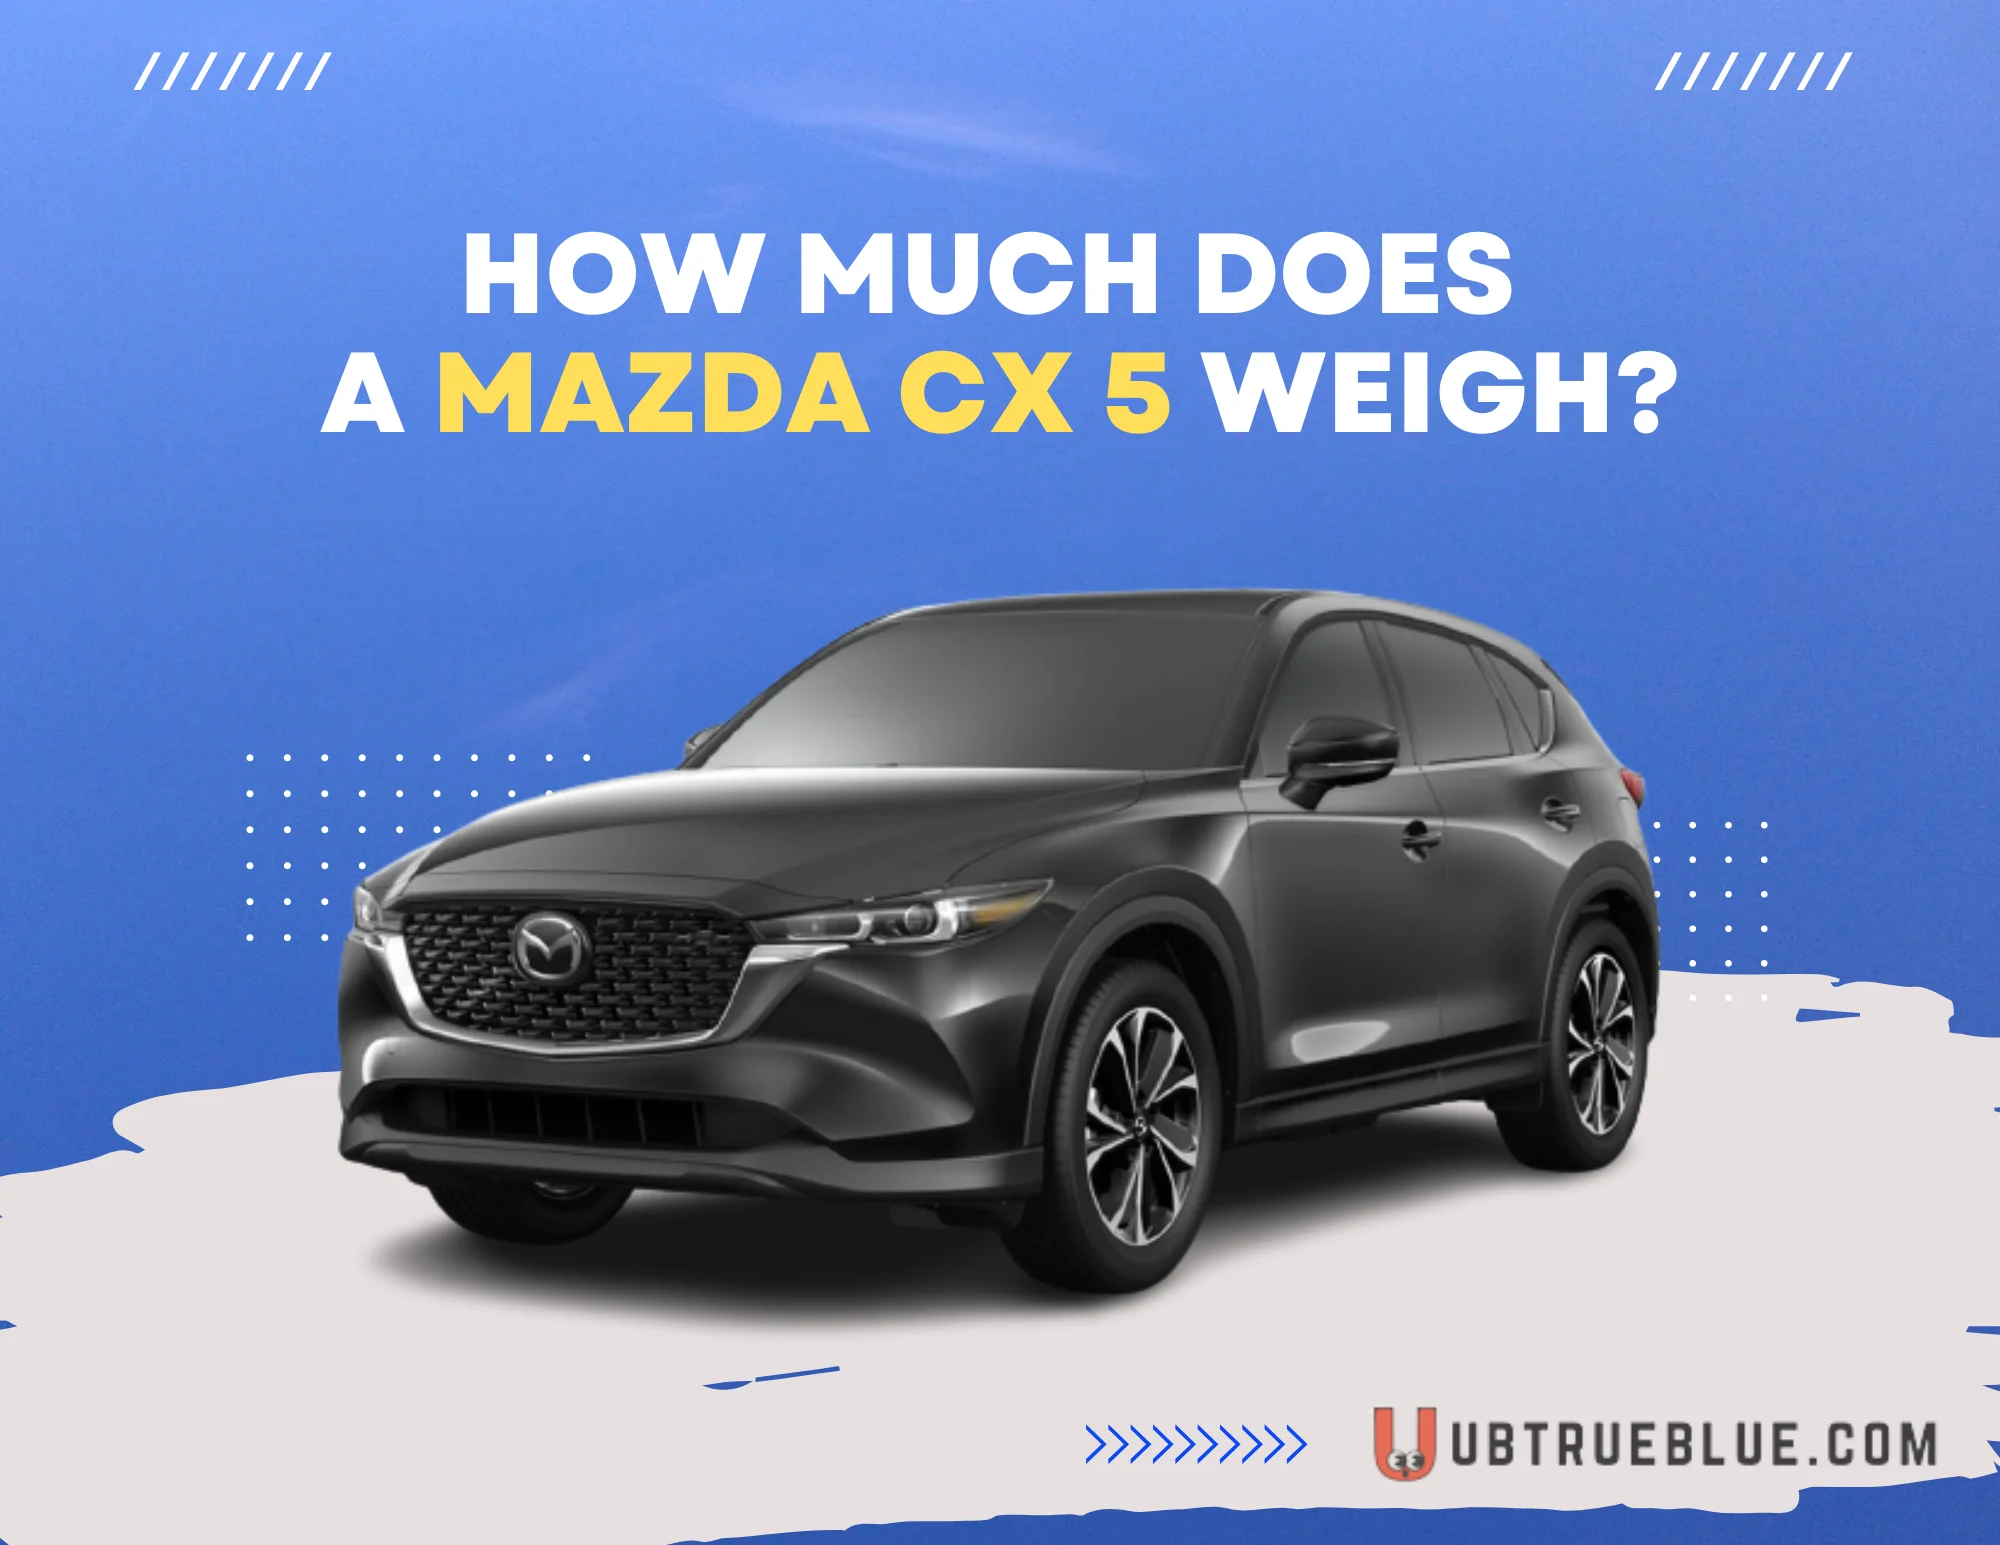 How Much Does A Mazda Cx 5 Weigh On Ubtrueblue Autos & Vehicles CX Weigh? Before You Drive Off, Know The Facts Cx-5 Length 9 Weight 2023 Dimensions Curb Kg  Full